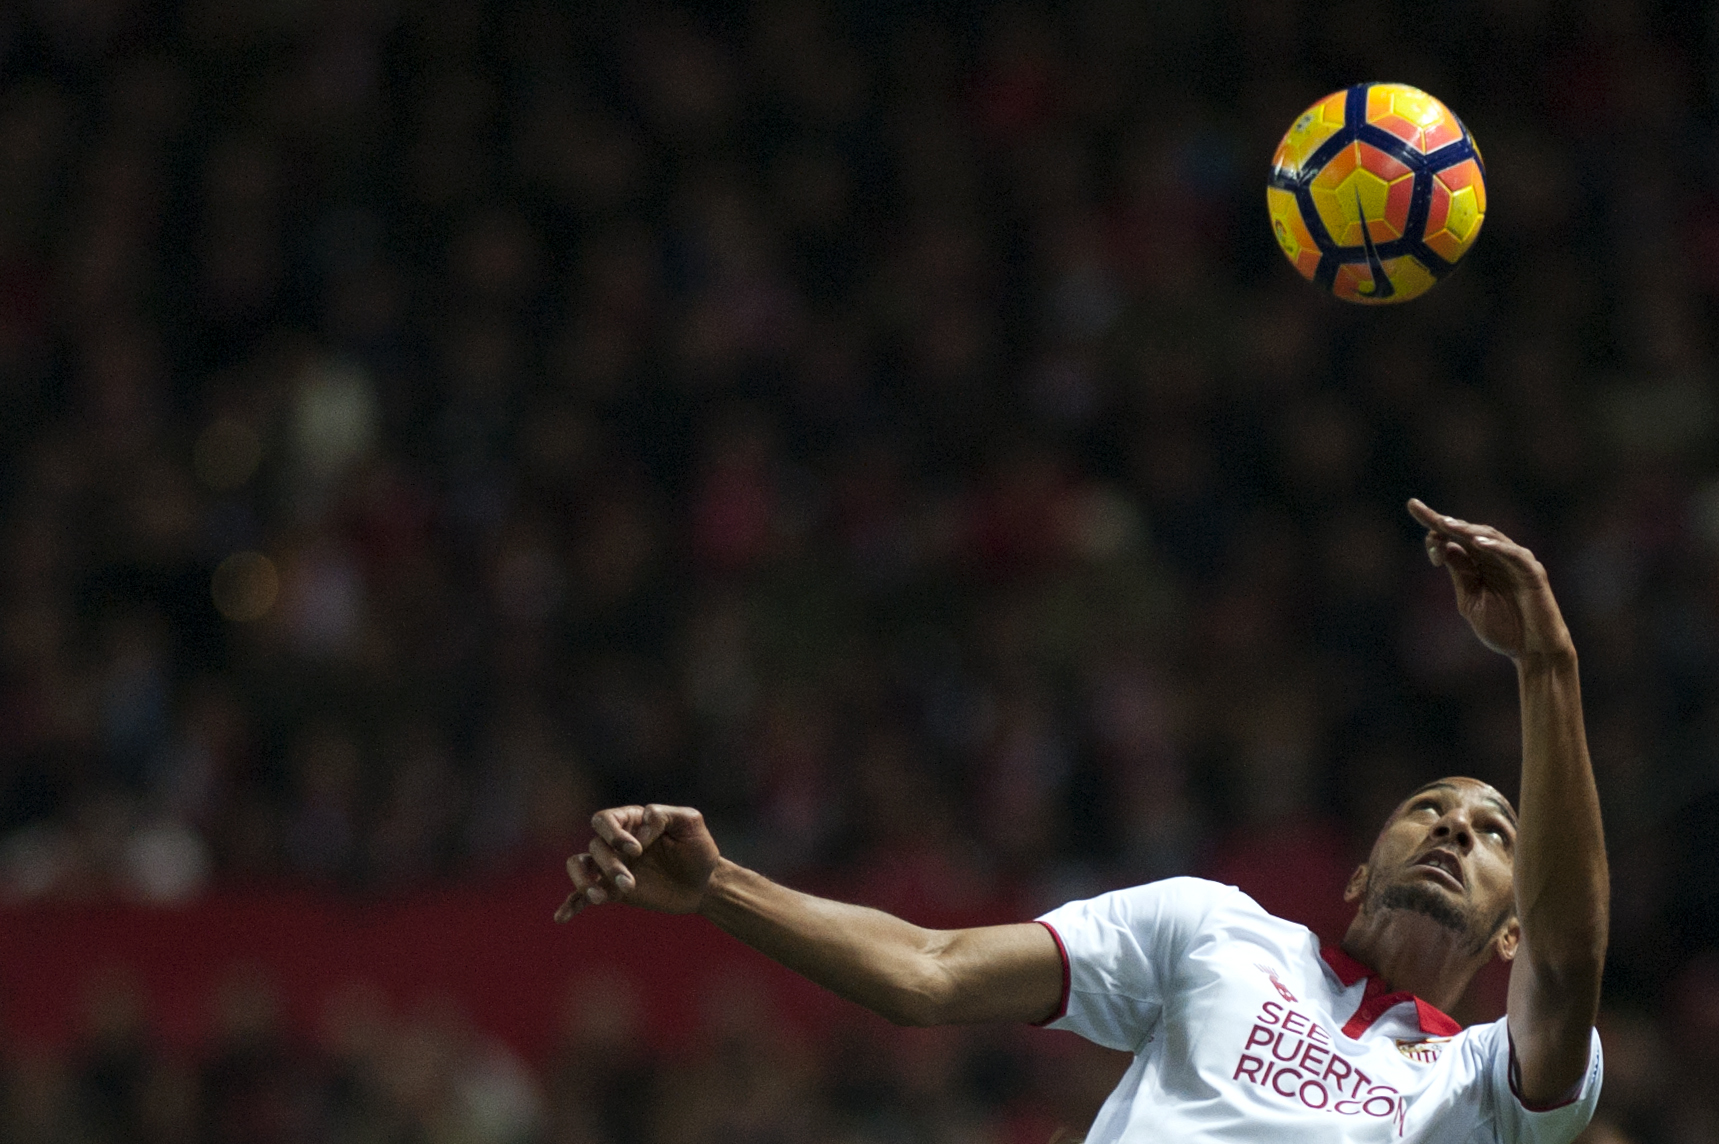 Sevilla's French midfielder Steven N'Zonzi eyes the ball during the Spanish league football match Sevilla FC vs Real Madrid CF at the Ramon Sanchez Pizjuan stadium in Sevilla on January 15, 2017. / AFP / JORGE GUERRERO        (Photo credit should read JORGE GUERRERO/AFP/Getty Images)